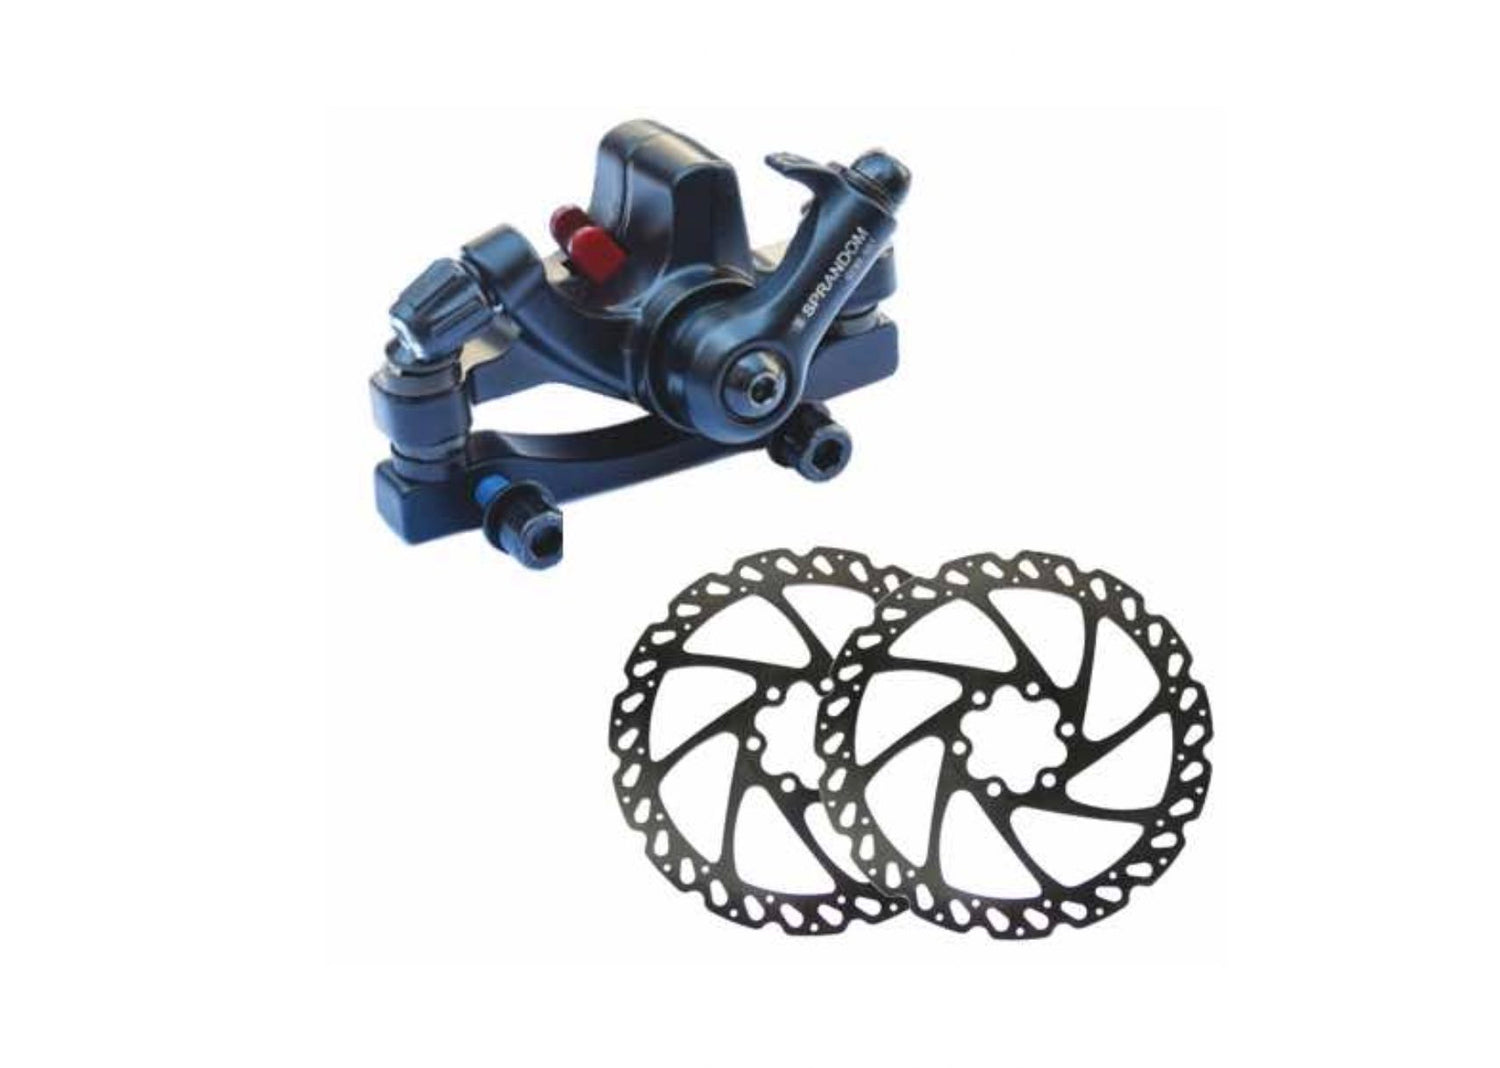 Bicycle Spare part online collection shop by omobikes